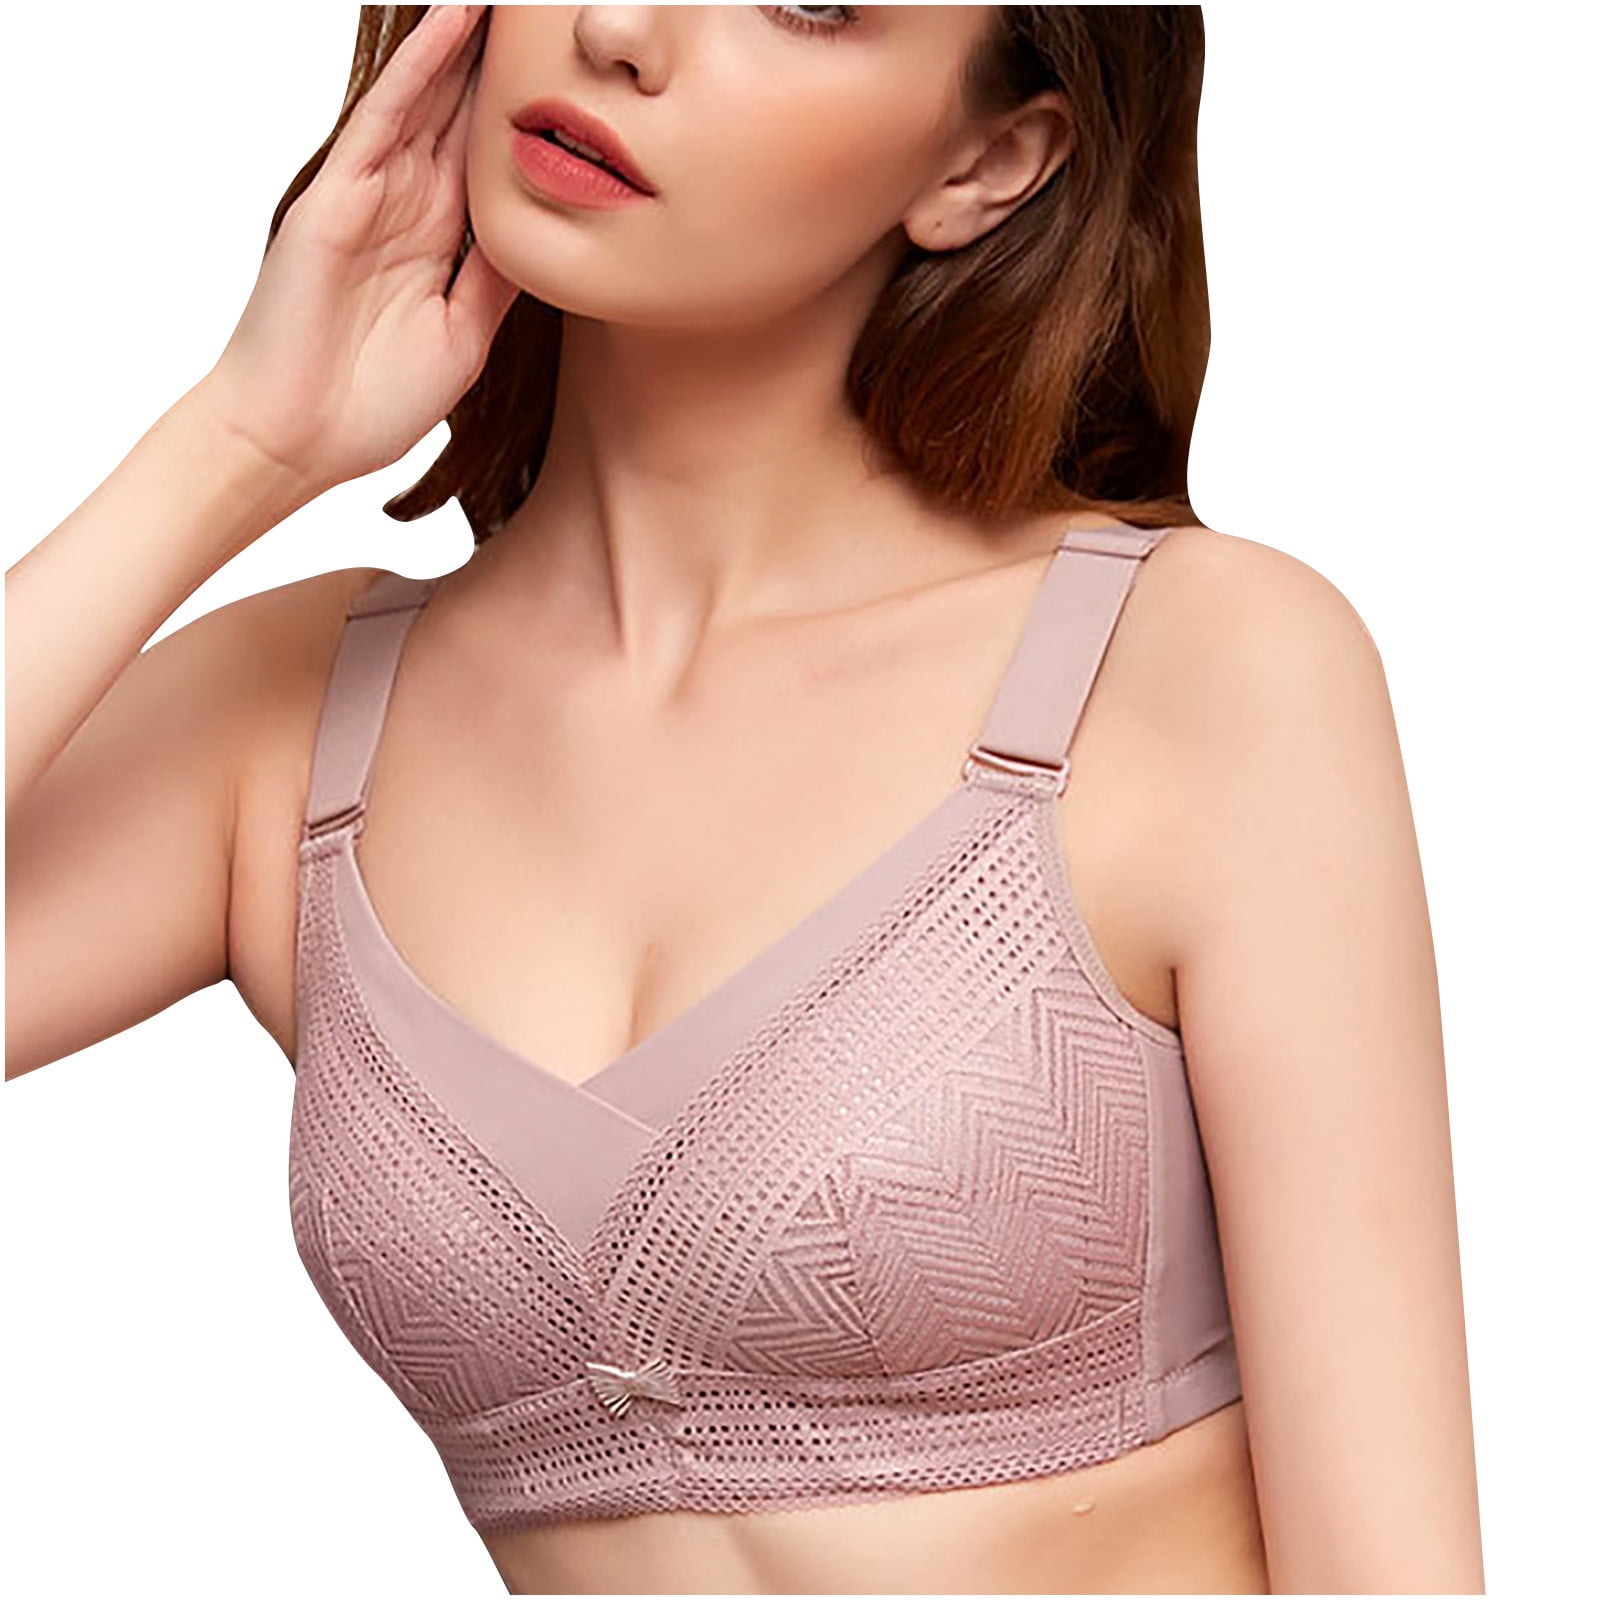 Bodycare 32B Size Bras Price Starting From Rs 211. Find Verified